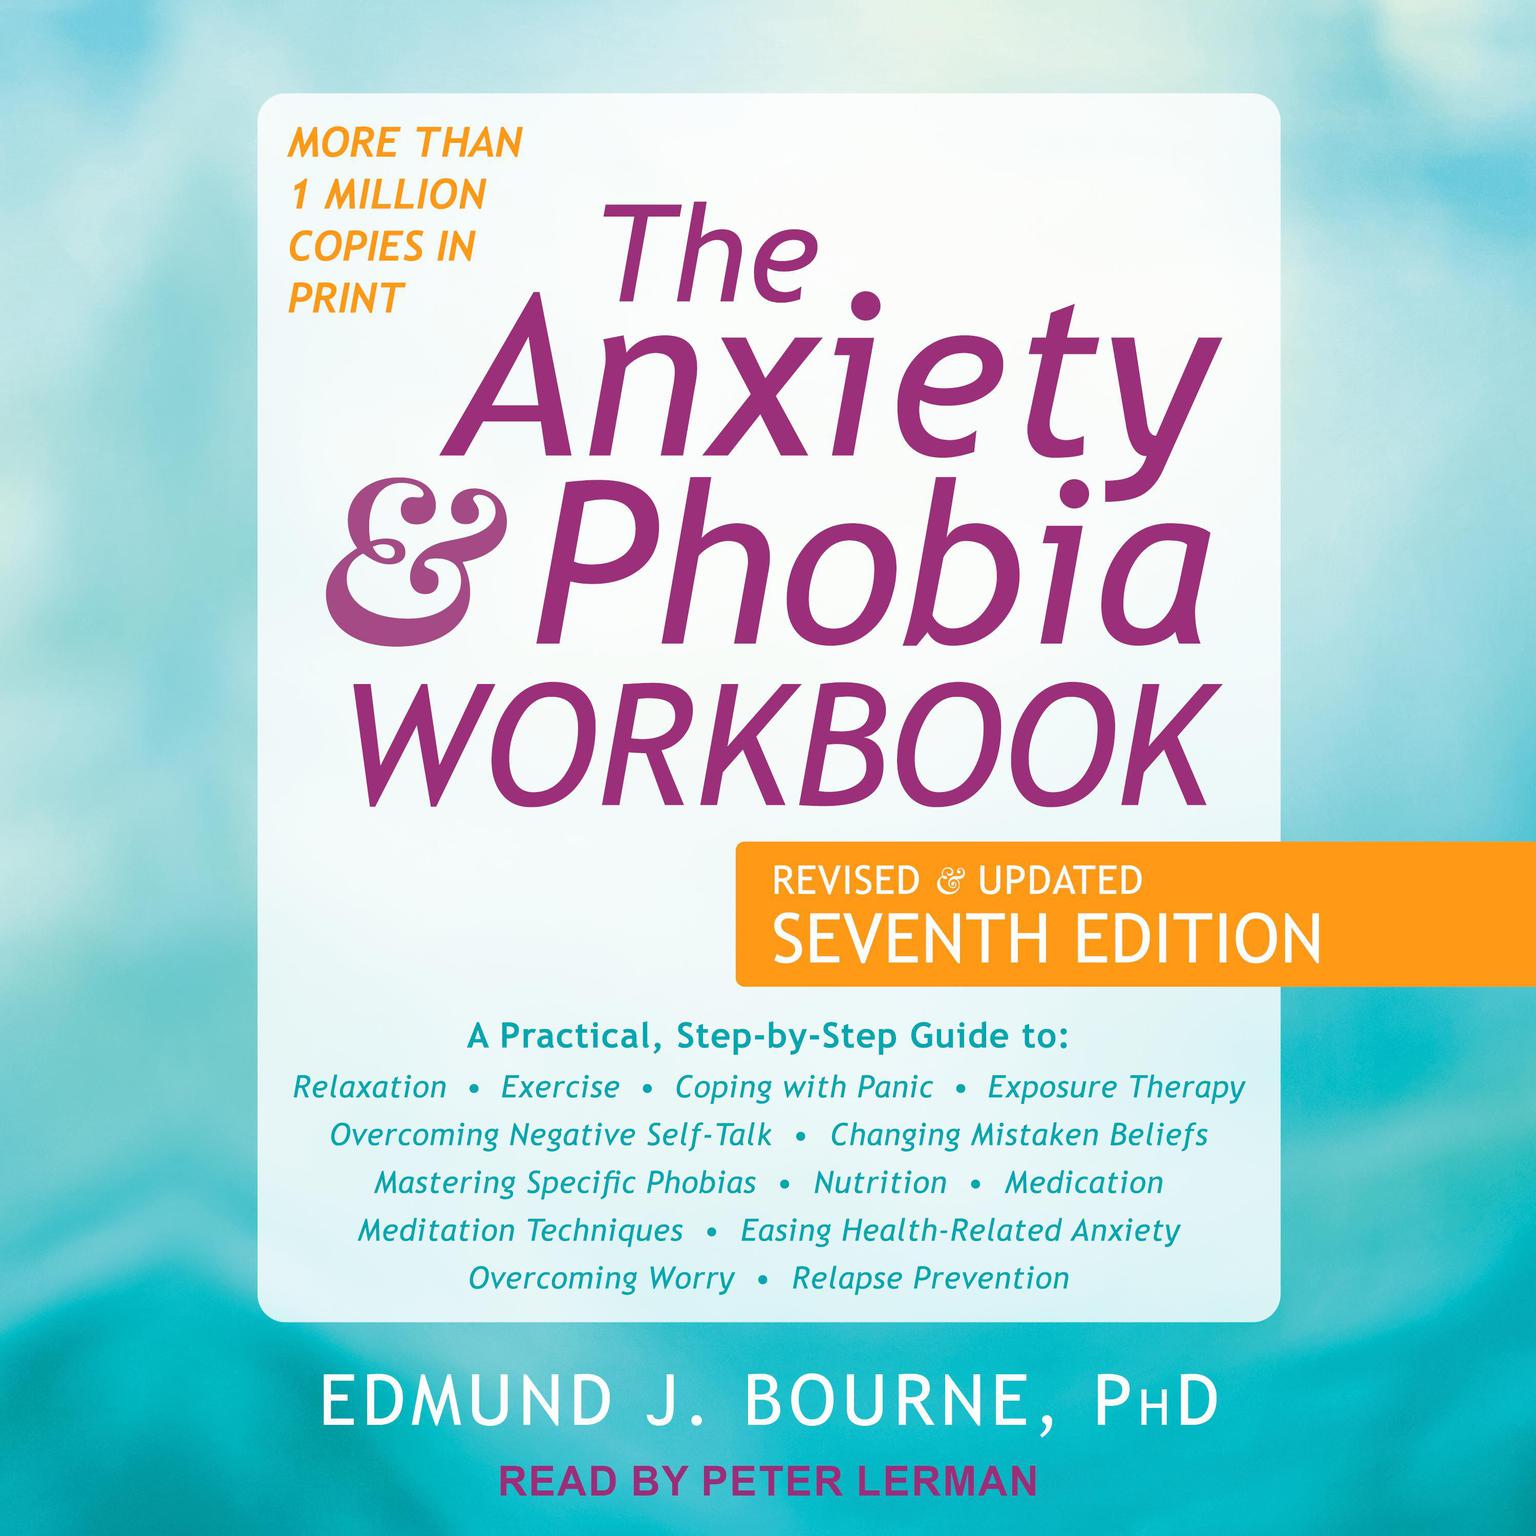 The Anxiety and Phobia Workbook: Revised and Updated Seventh Edition Audiobook, by Edmund J. Bourne